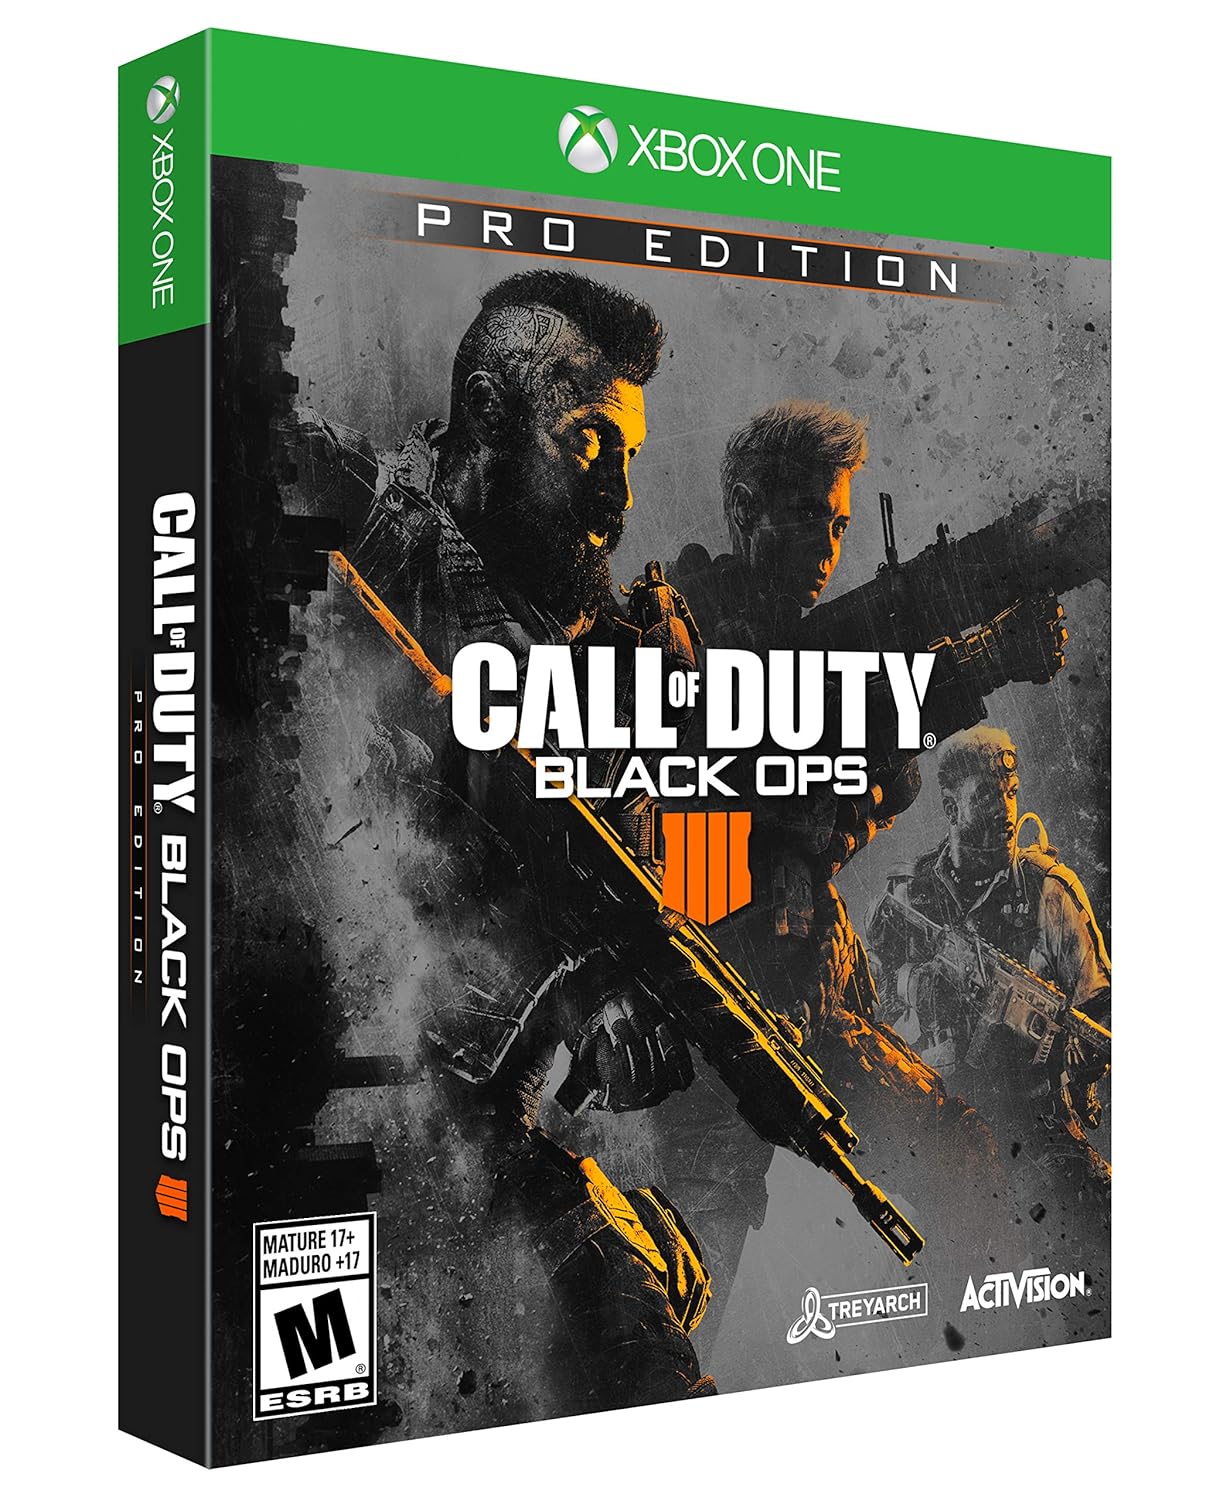 Call of Duty: Black Ops 4 - PlayStation 4 Standard Edition